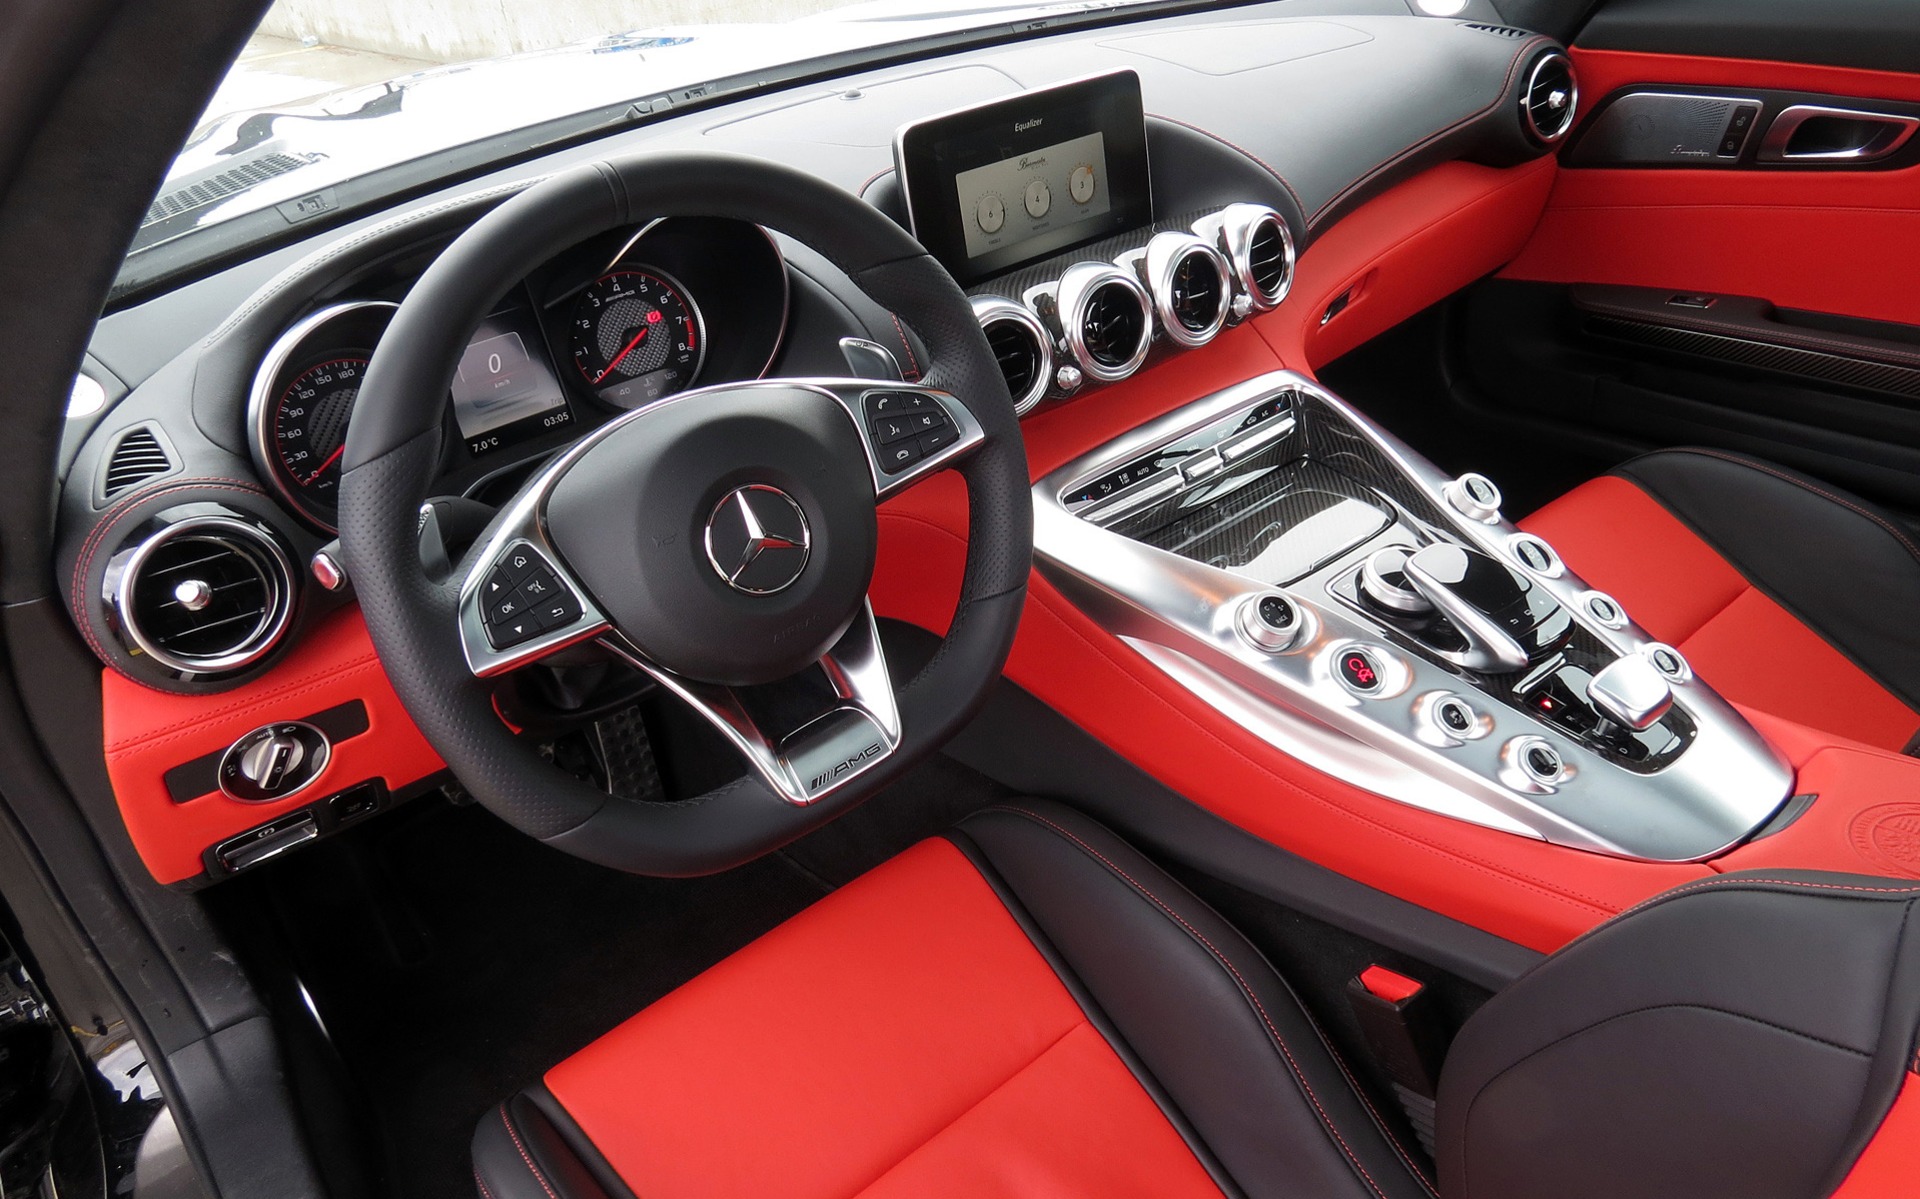 The cabin of the GT S is beautiful and photogenic in red and black.